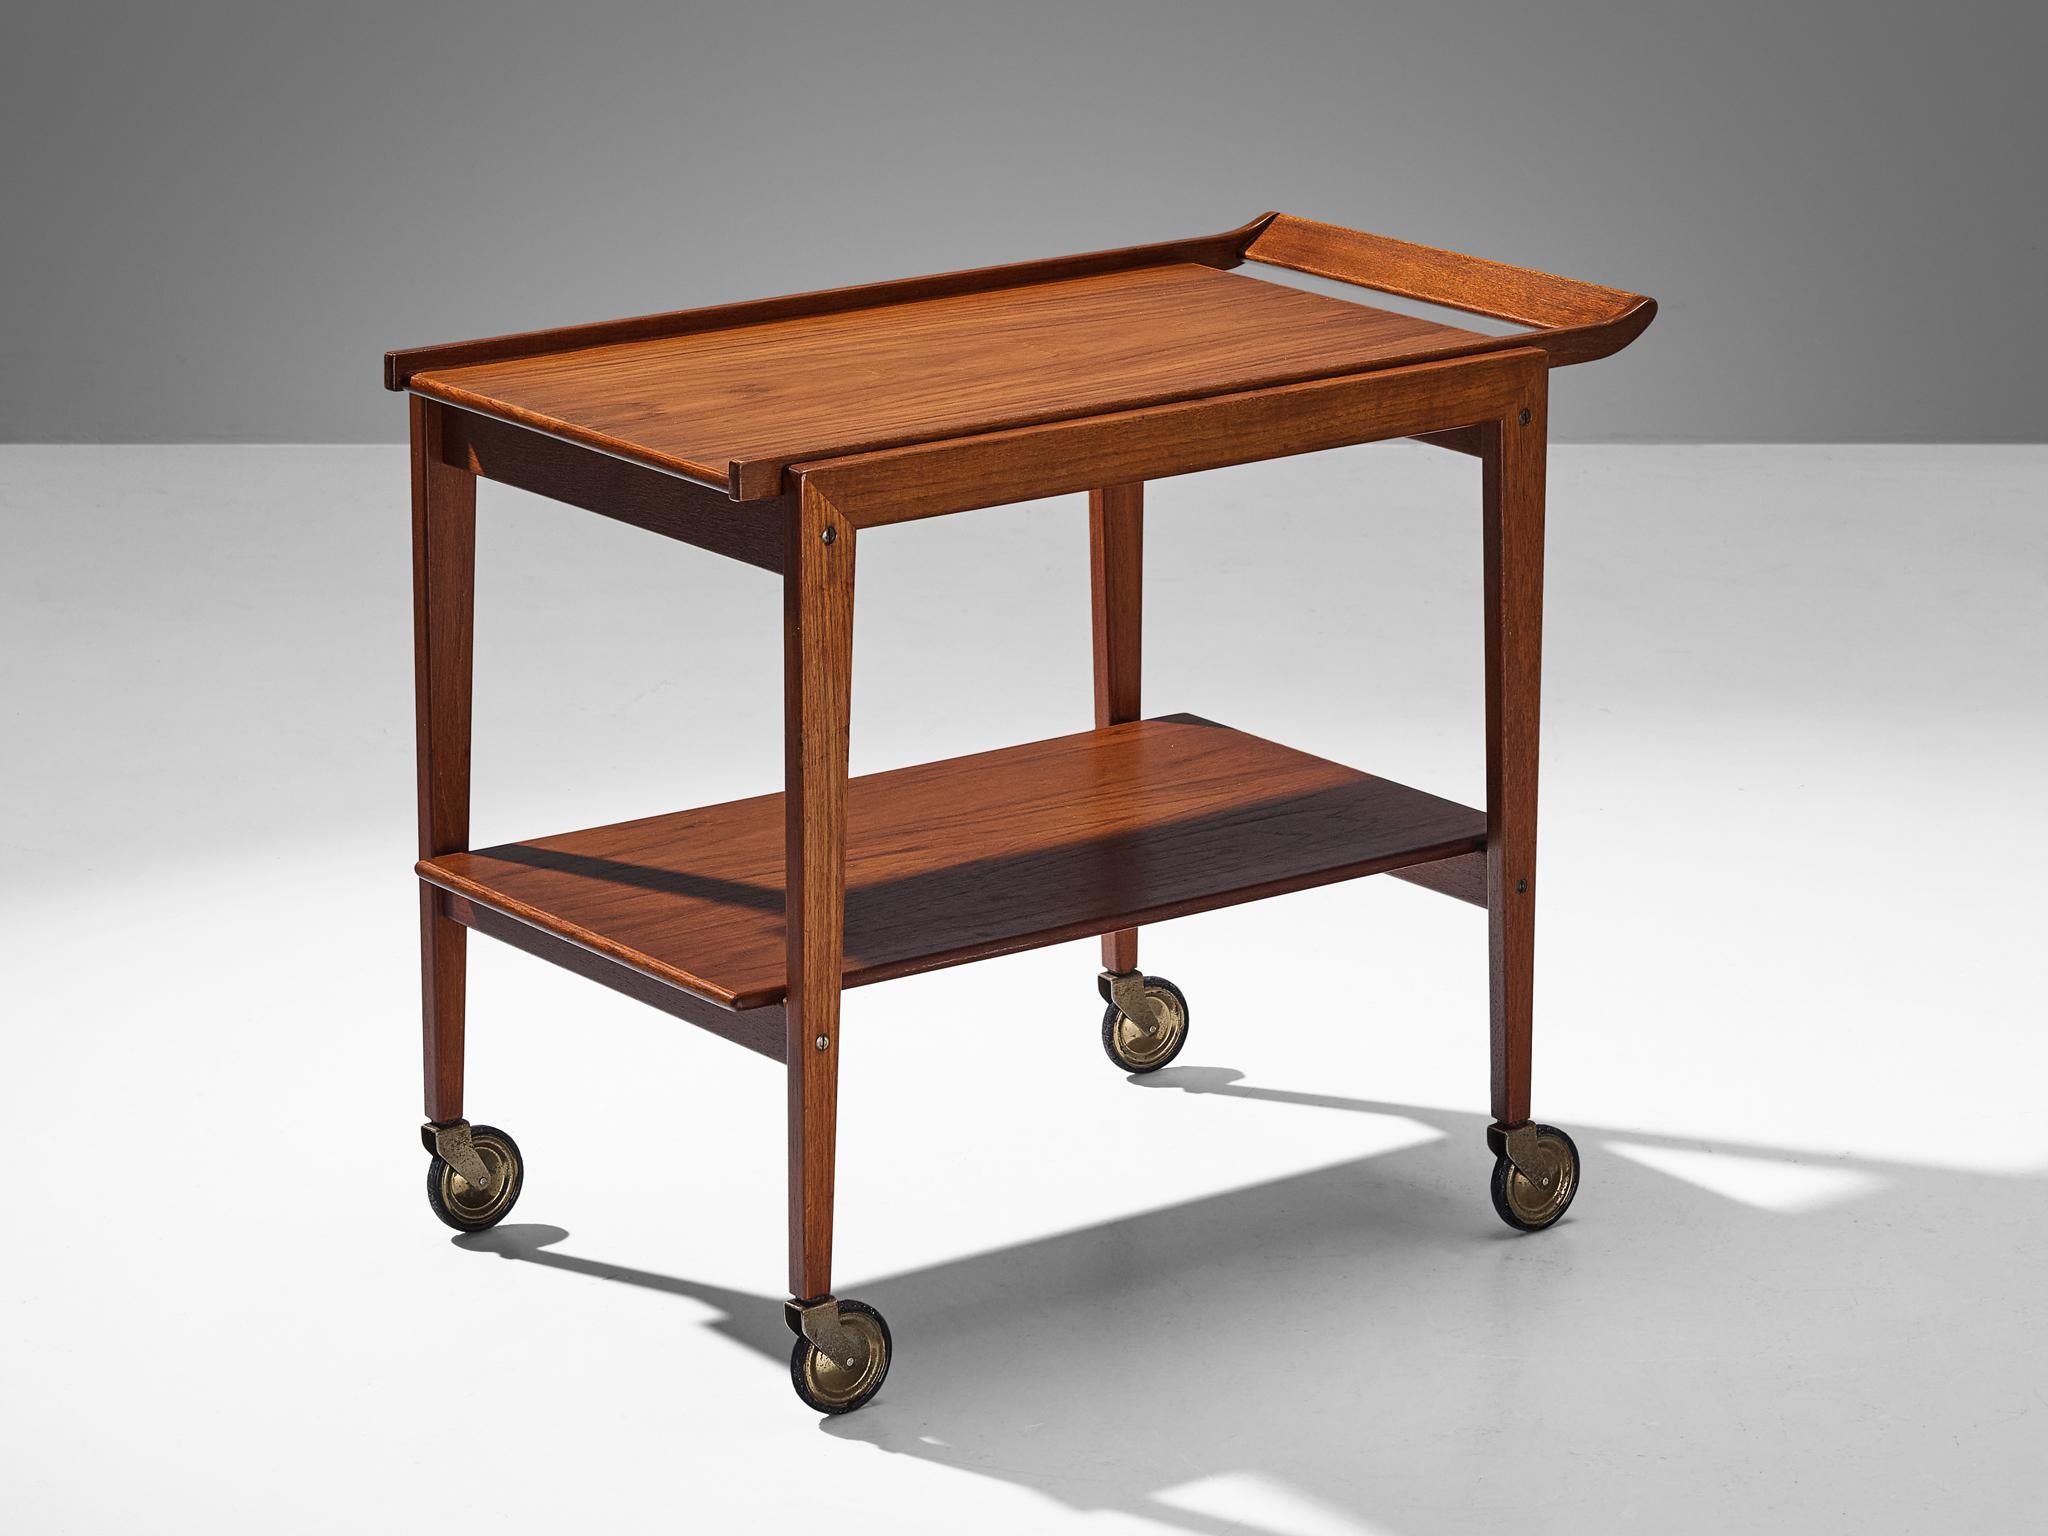 Trolley or bar cart, teak, metal, Europe, 1960s.

This solid bar cart has been executed in wood. The piece has a solid wooden frame and two shelves. The piece has four wheels so it can be used as a trolley. The natural materials form a modest